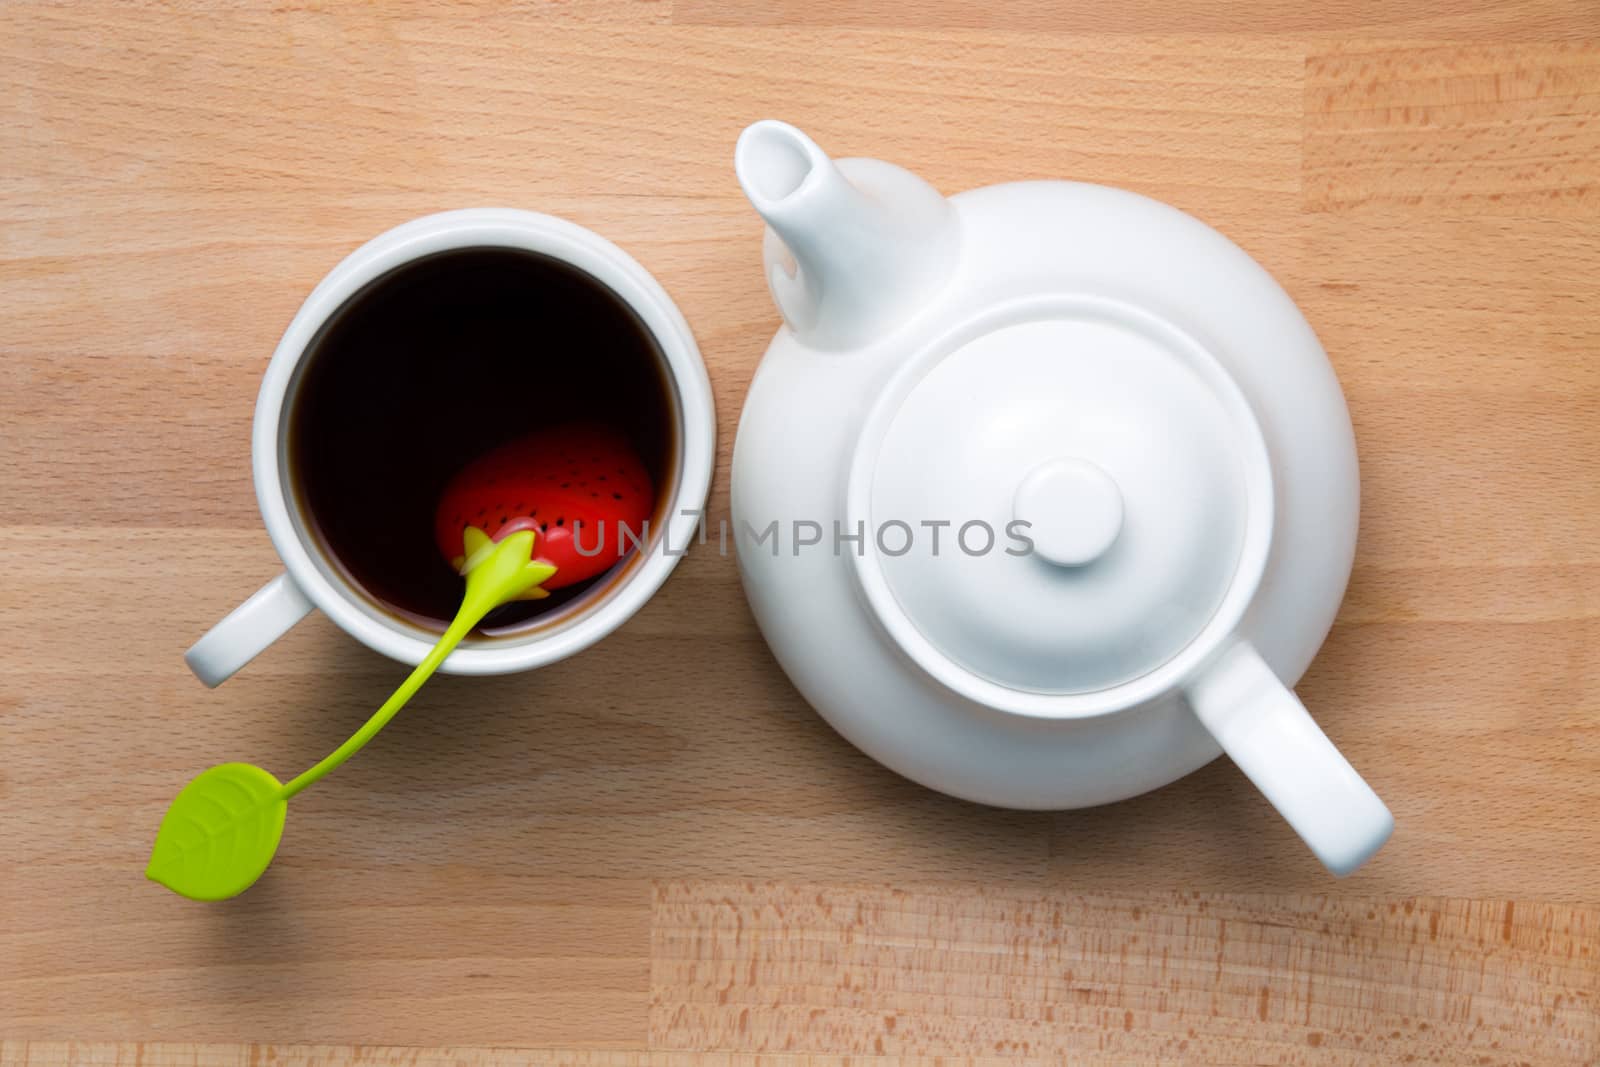 Infused tea and teapot  next to each other on beech wood, shot from top